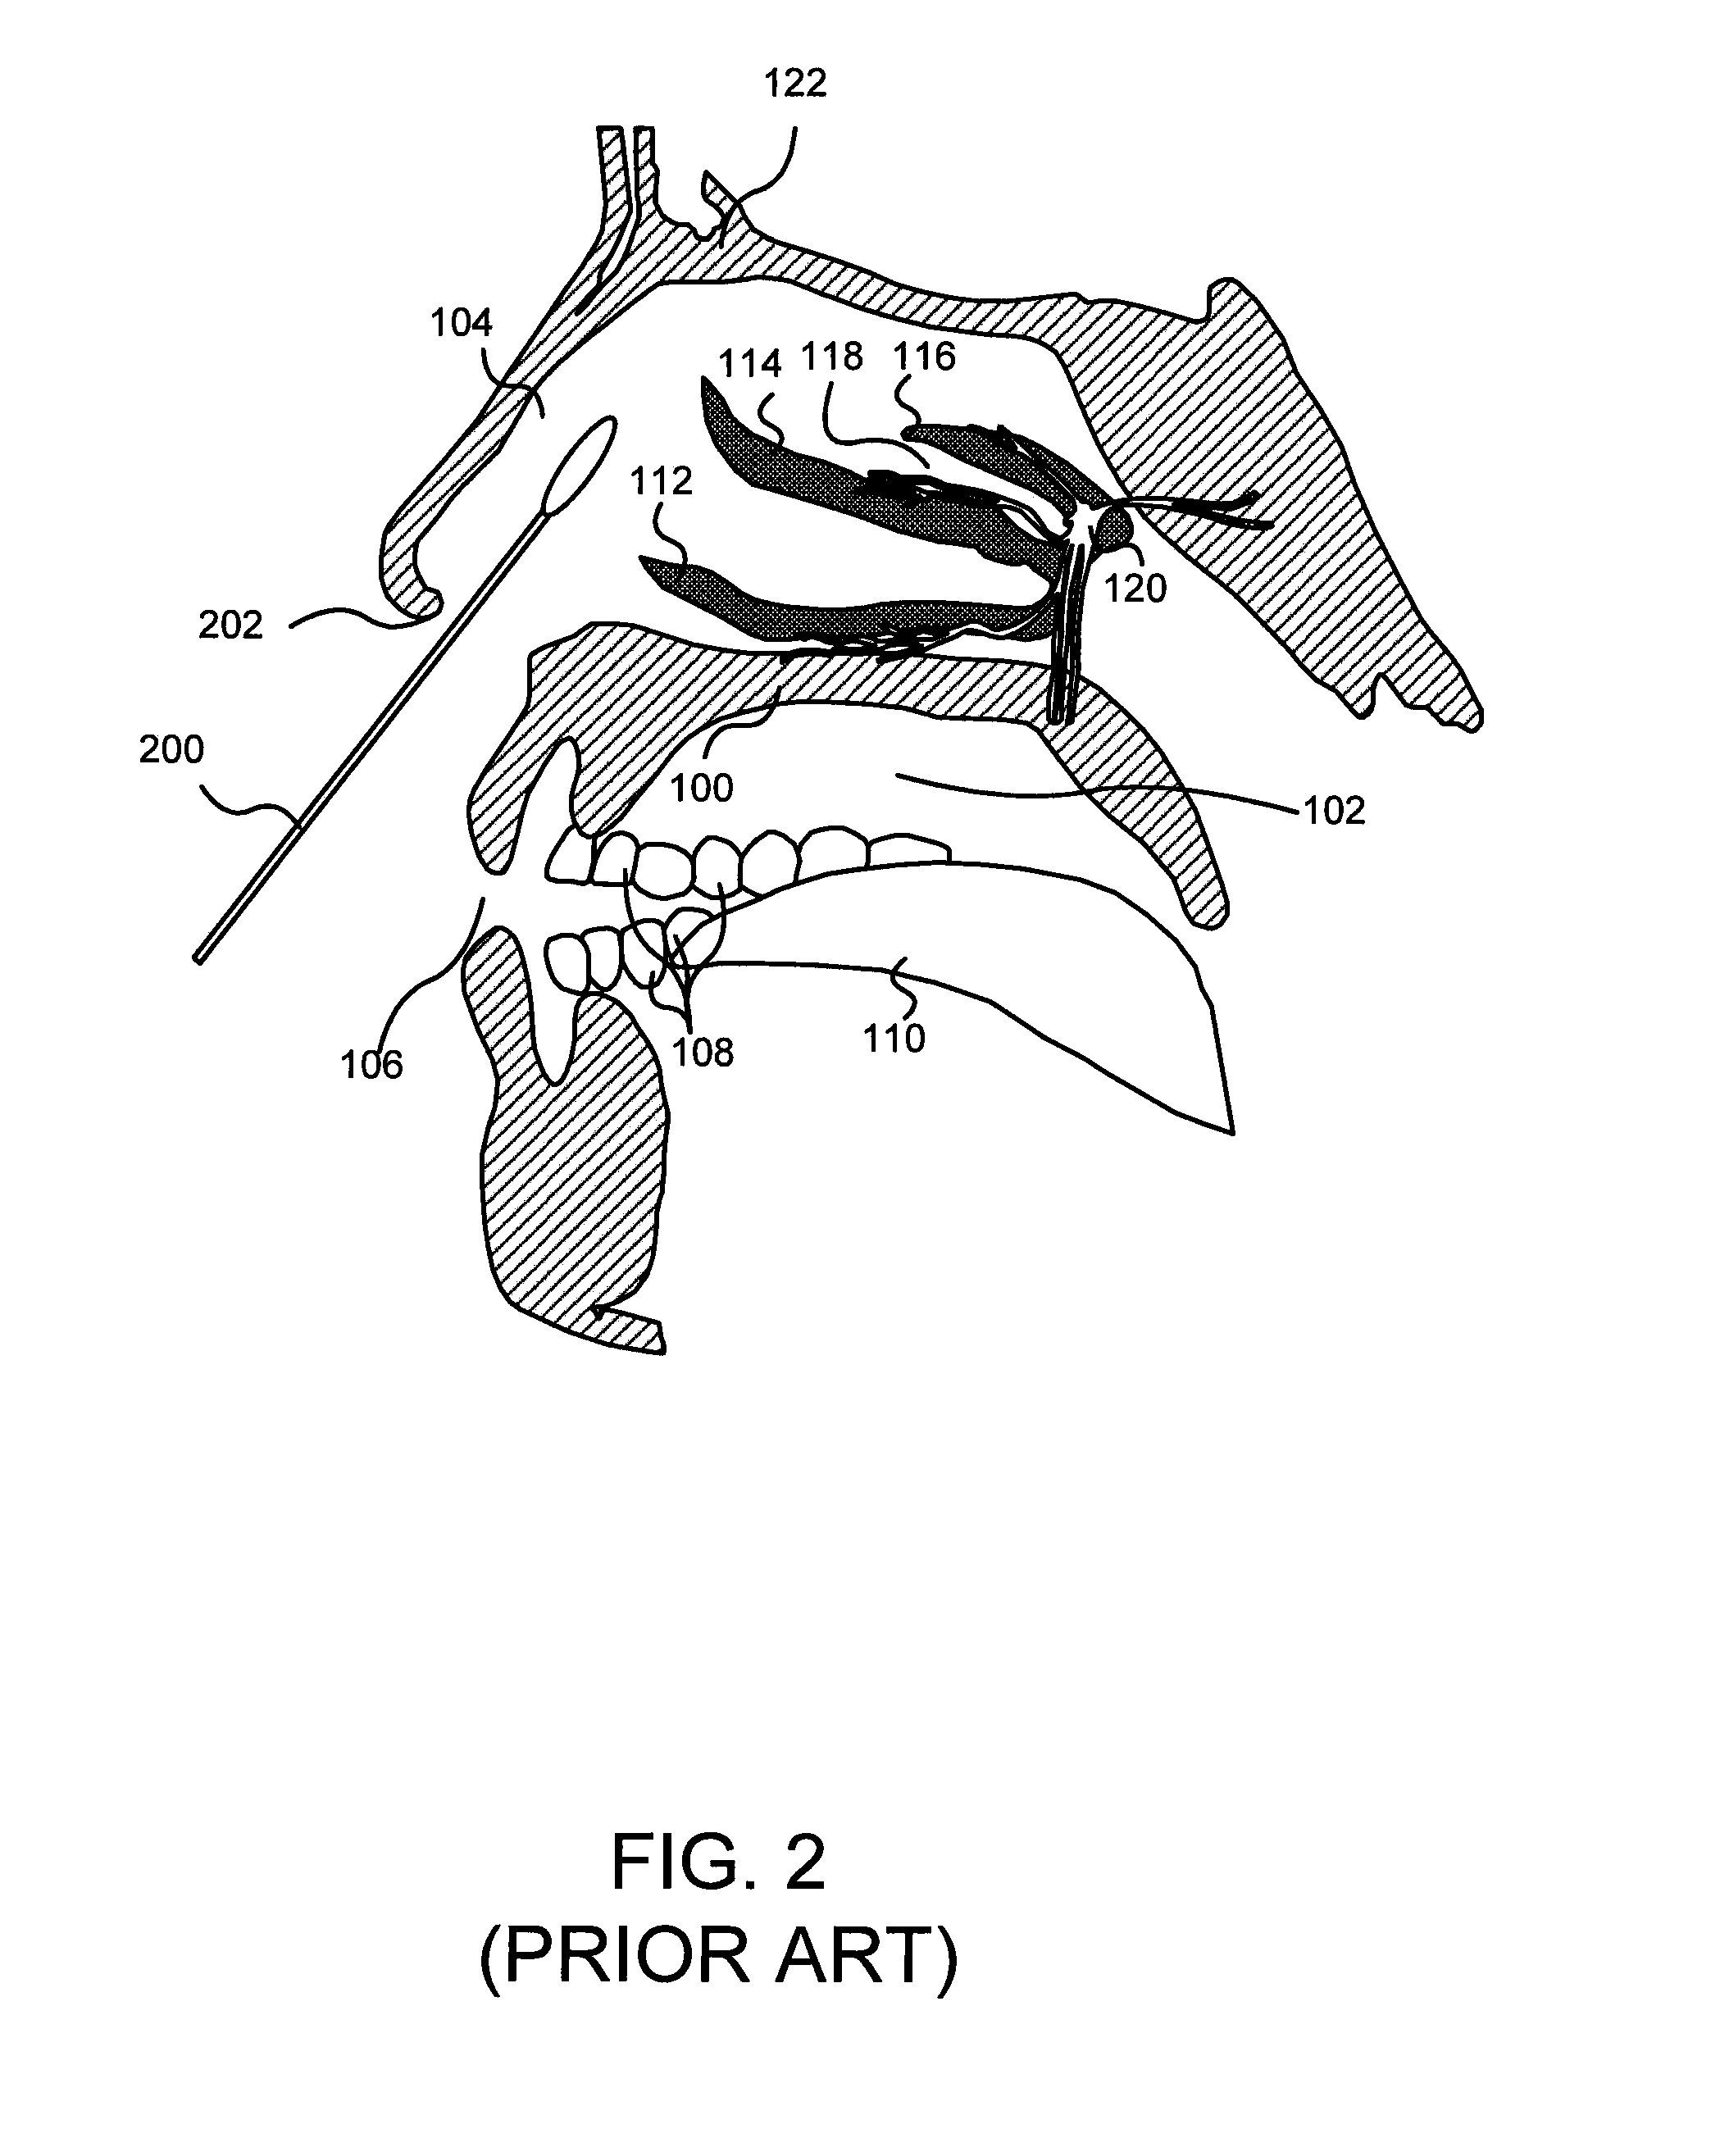 Enhanced systems, processes and apparatus for facilitating intranasal treatment of a patient and products thereby